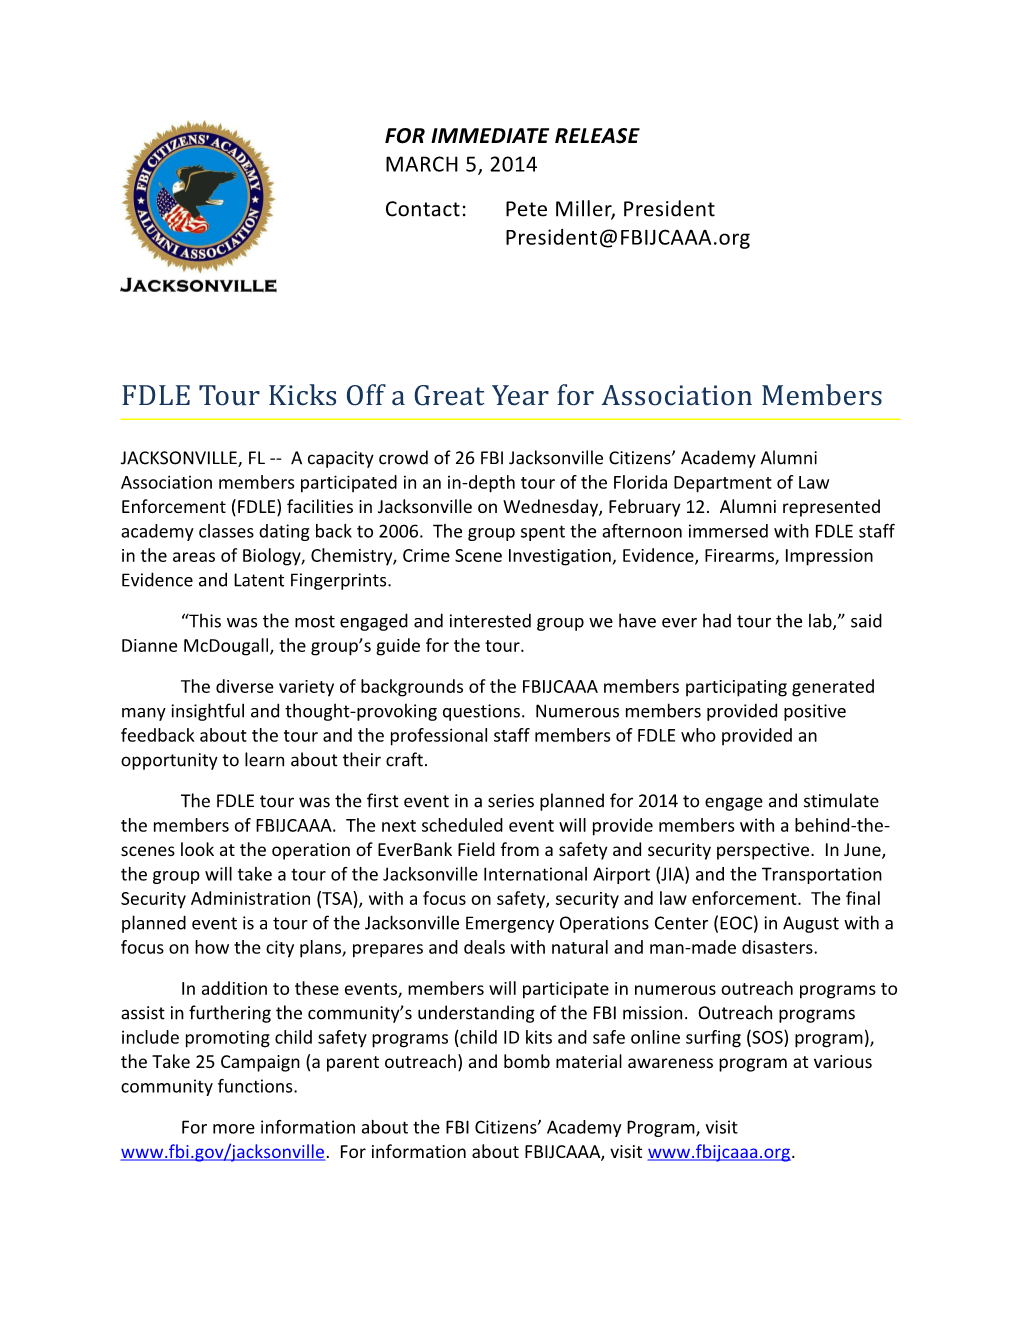 FDLE Tour Kicks Off a Great Year for Association Members